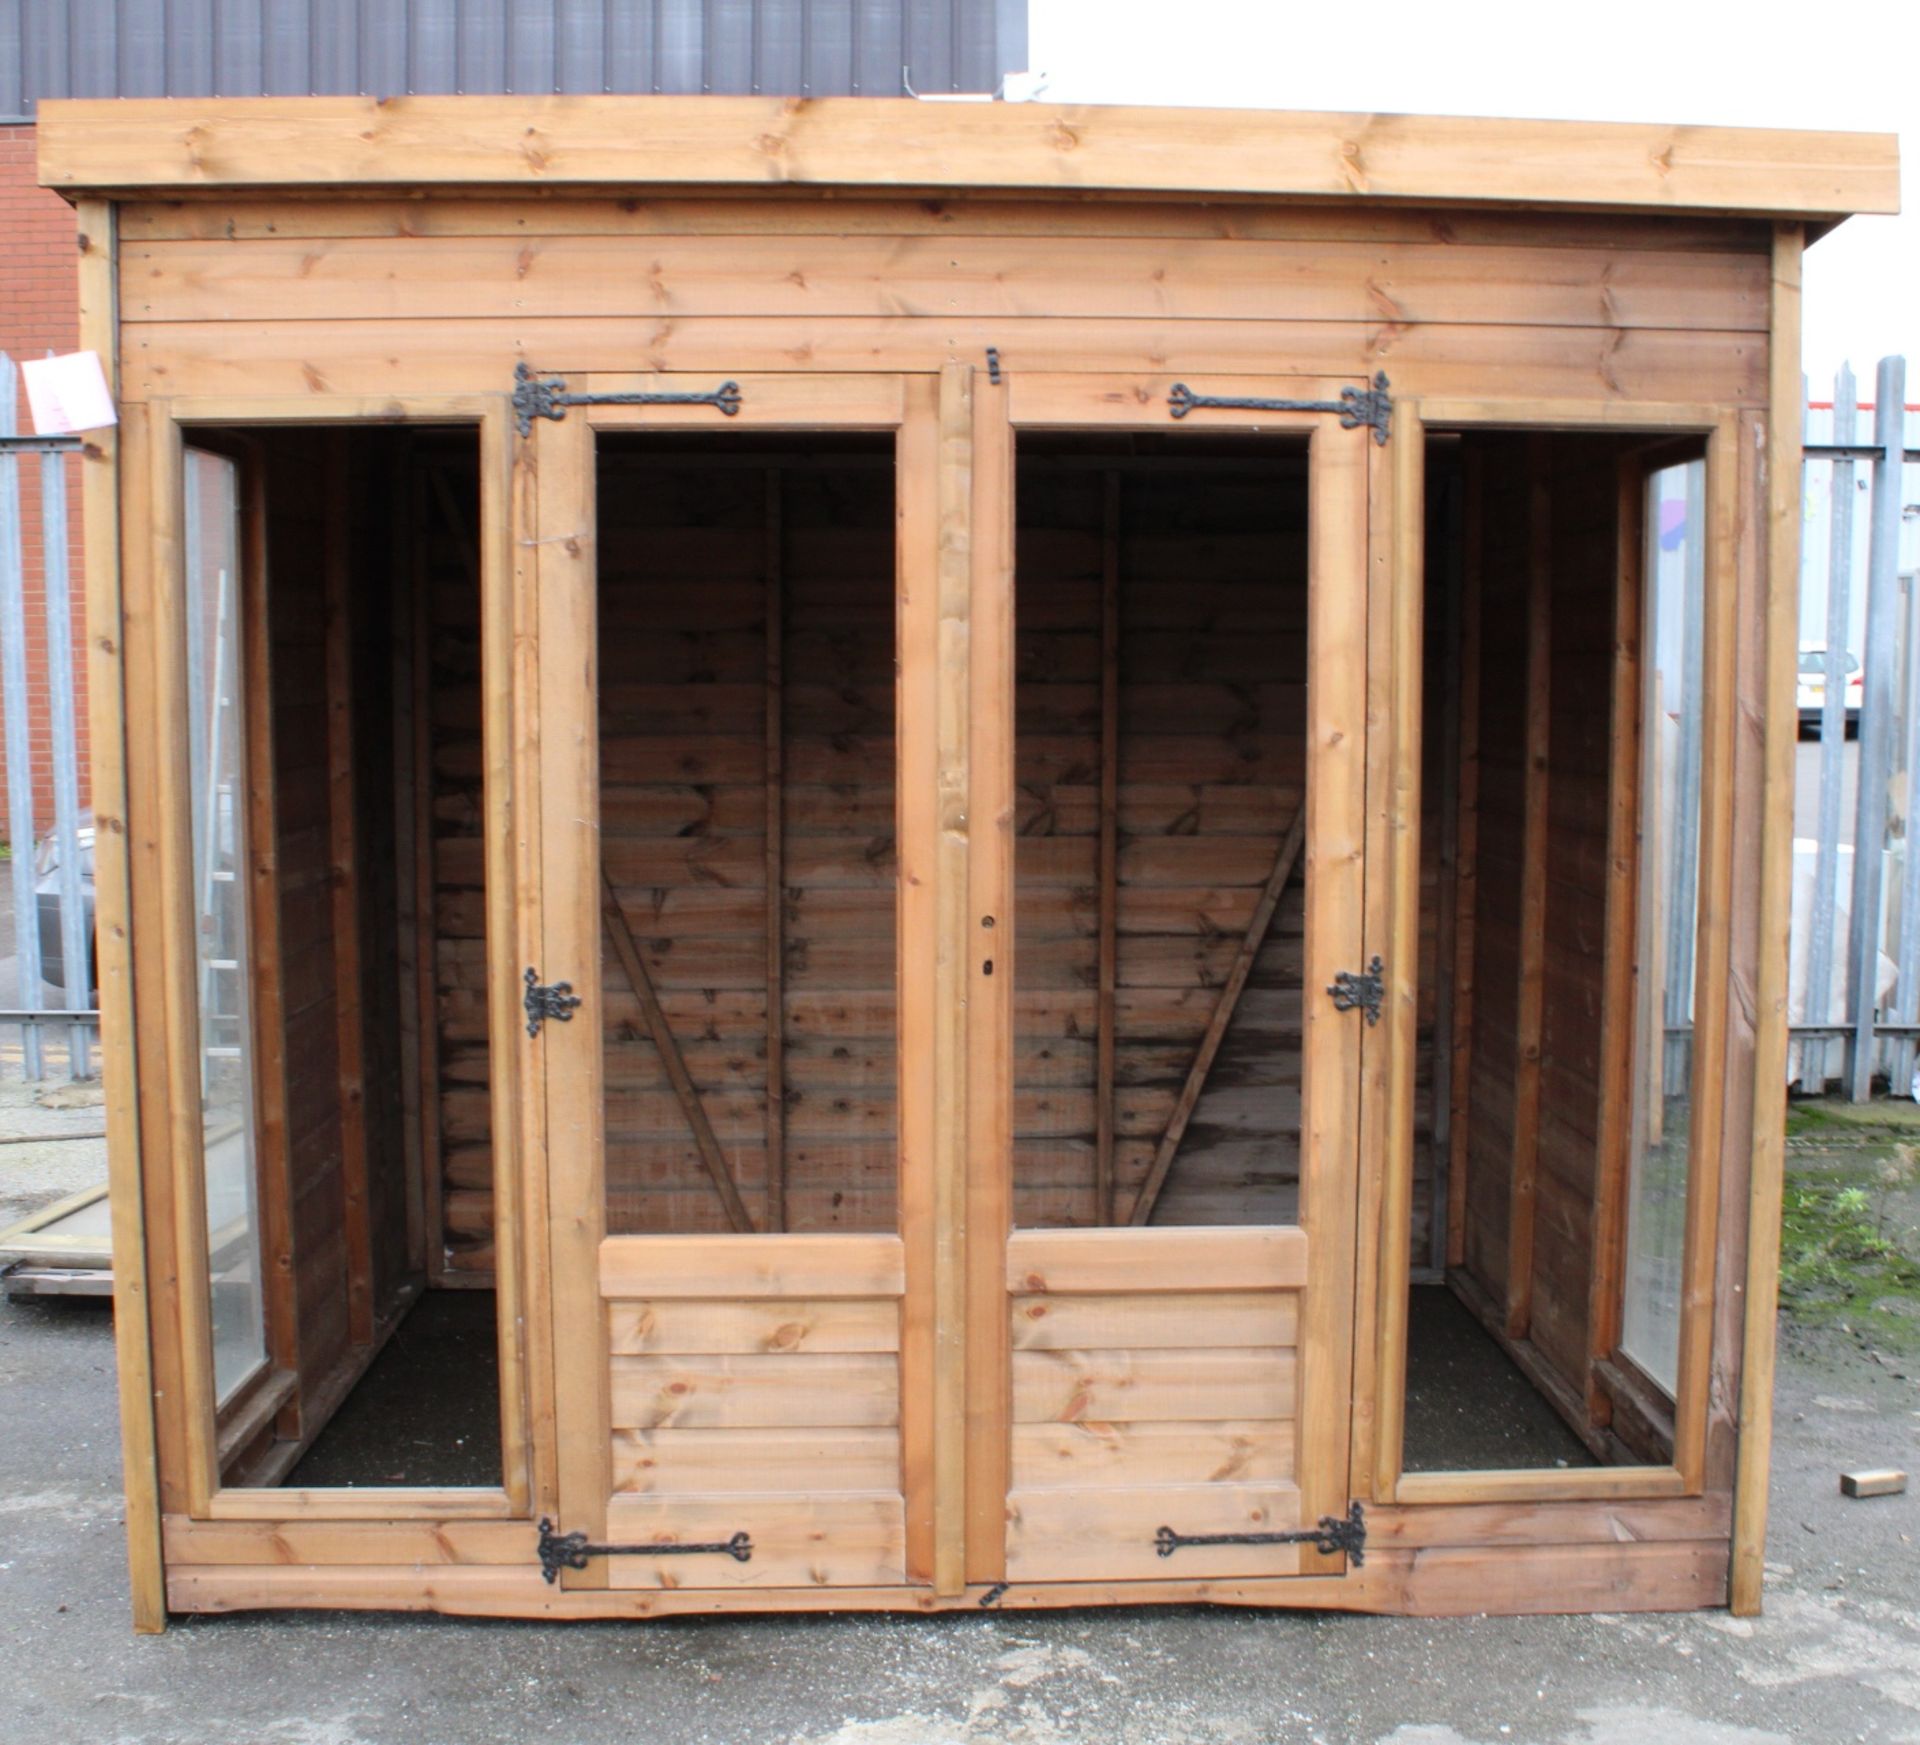 8x6 'clumber' summerhouse timber shed building, Standard 16mm Nominal Cladding